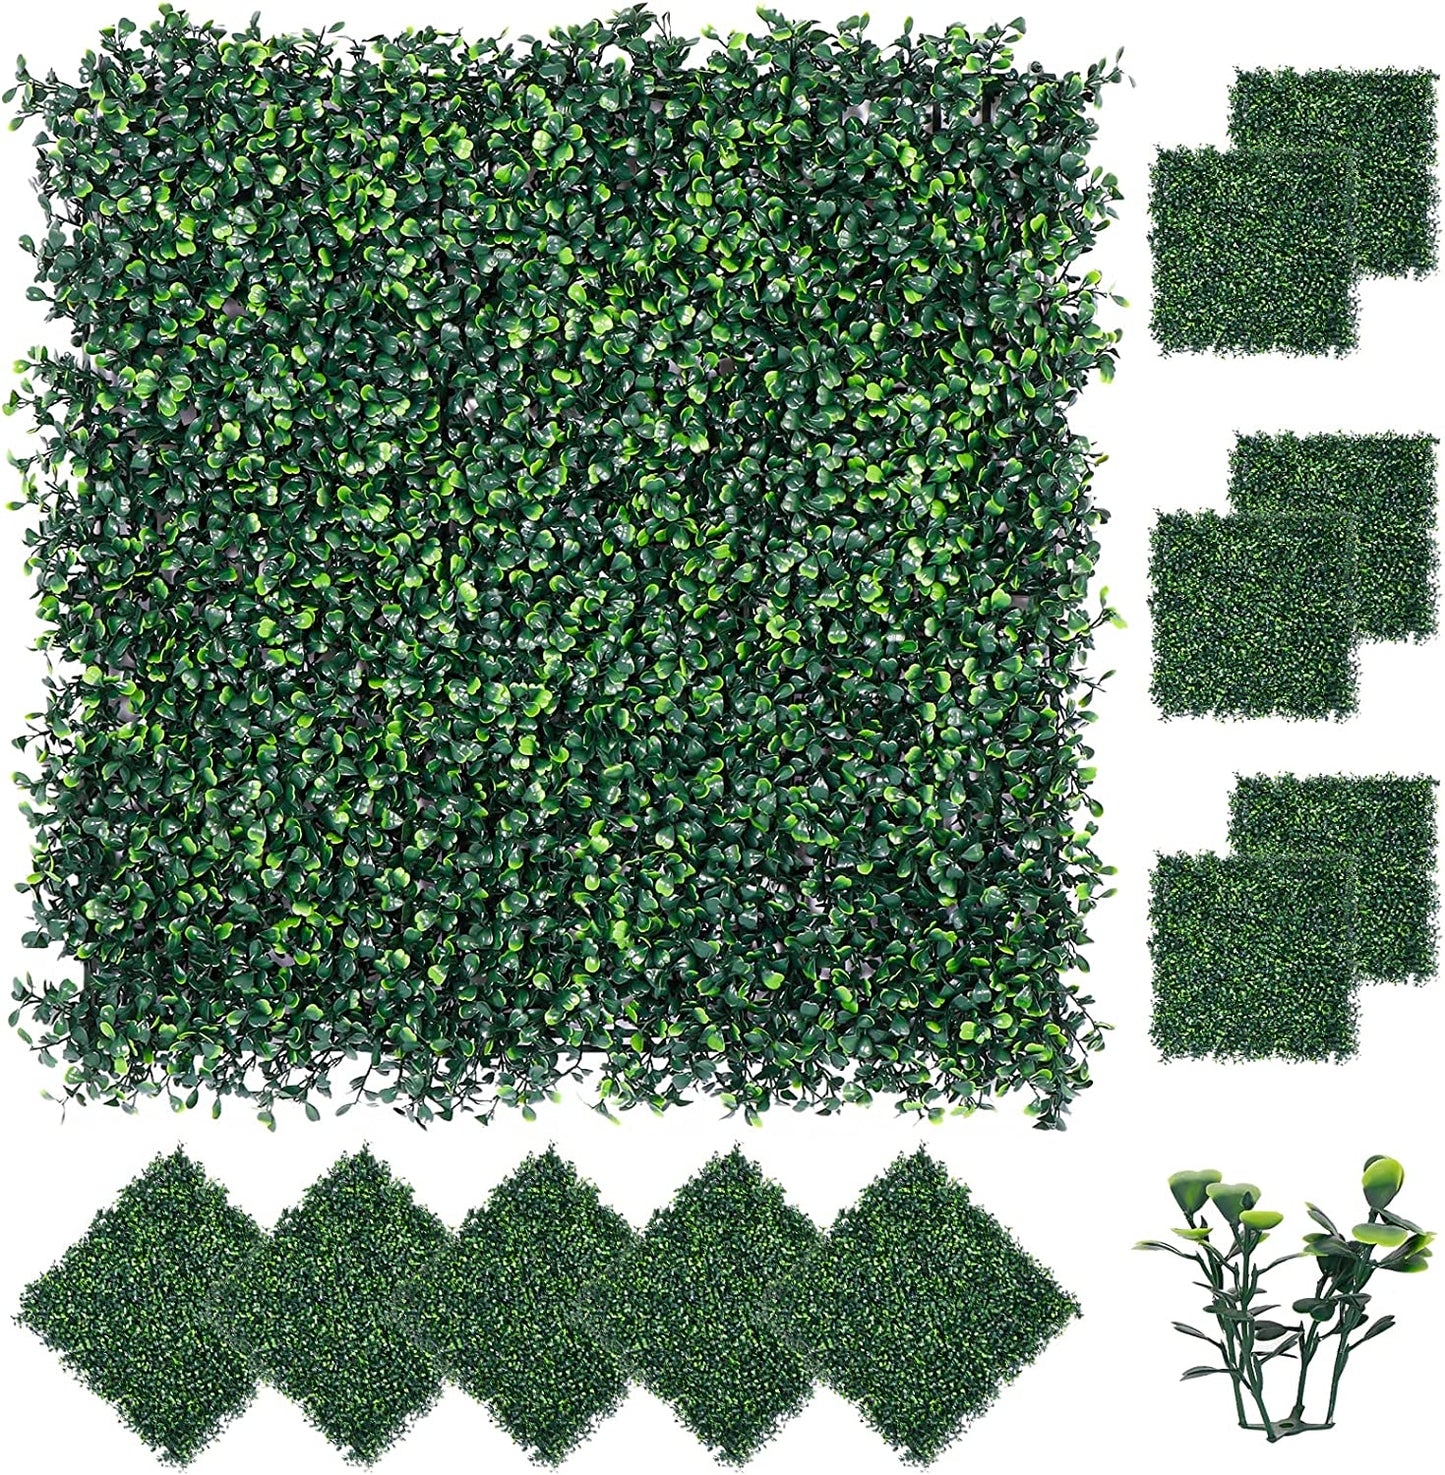 Artificial Boxwood Panels 12PCS 20’’x20’’ Grass Wall Panels Artificial Green Wall Decor Privacy Fence Backyard Screen, Green Hedge Backdrop Wall for Birthday, Wedding Party Wall Decoration